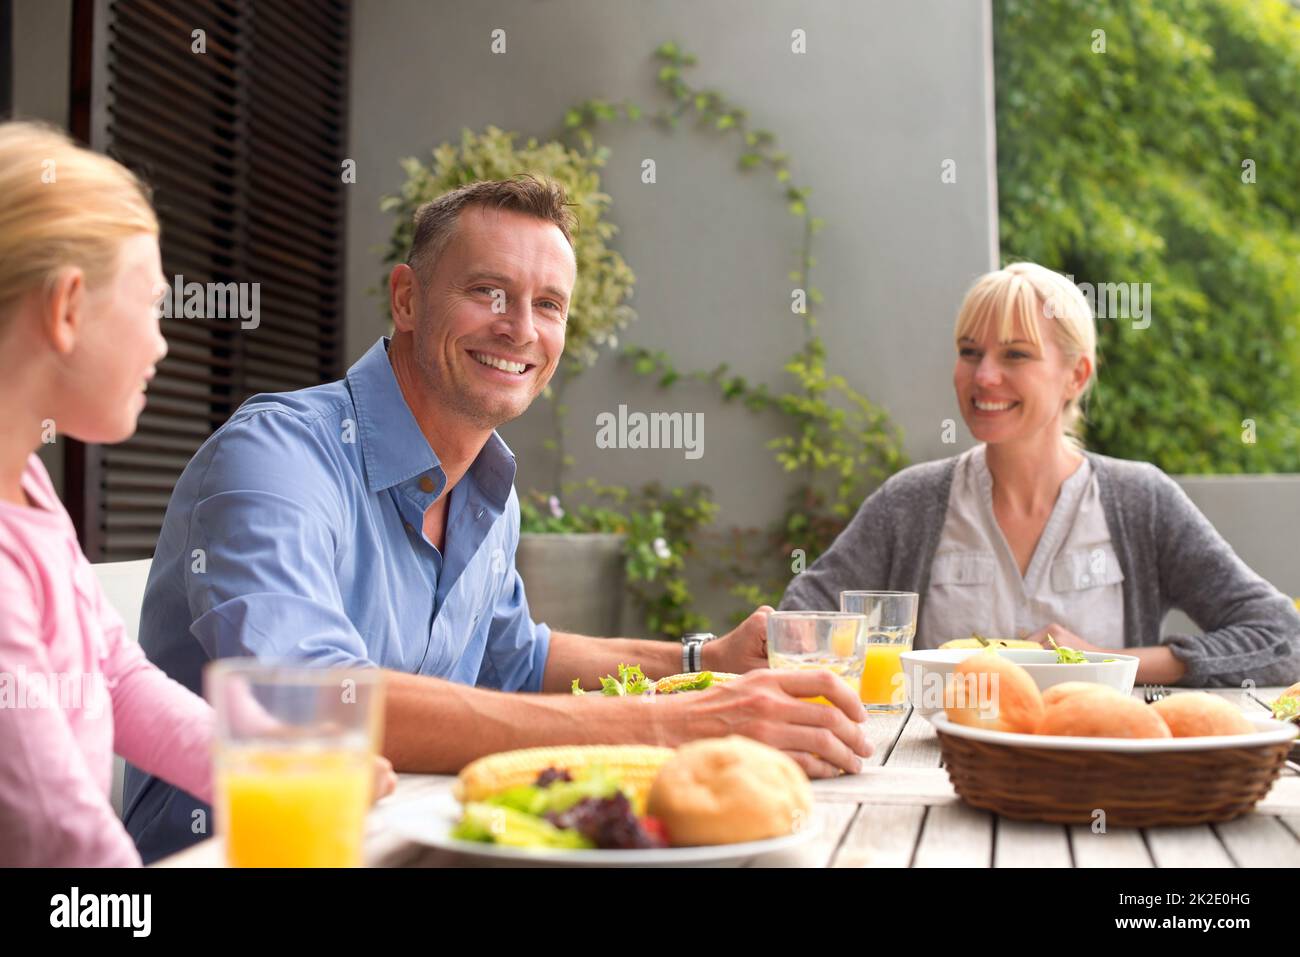 Enjoying lunch as a family. A cropped shot of a happy family enjoying a meal together outdoors on a sunny day. Stock Photo